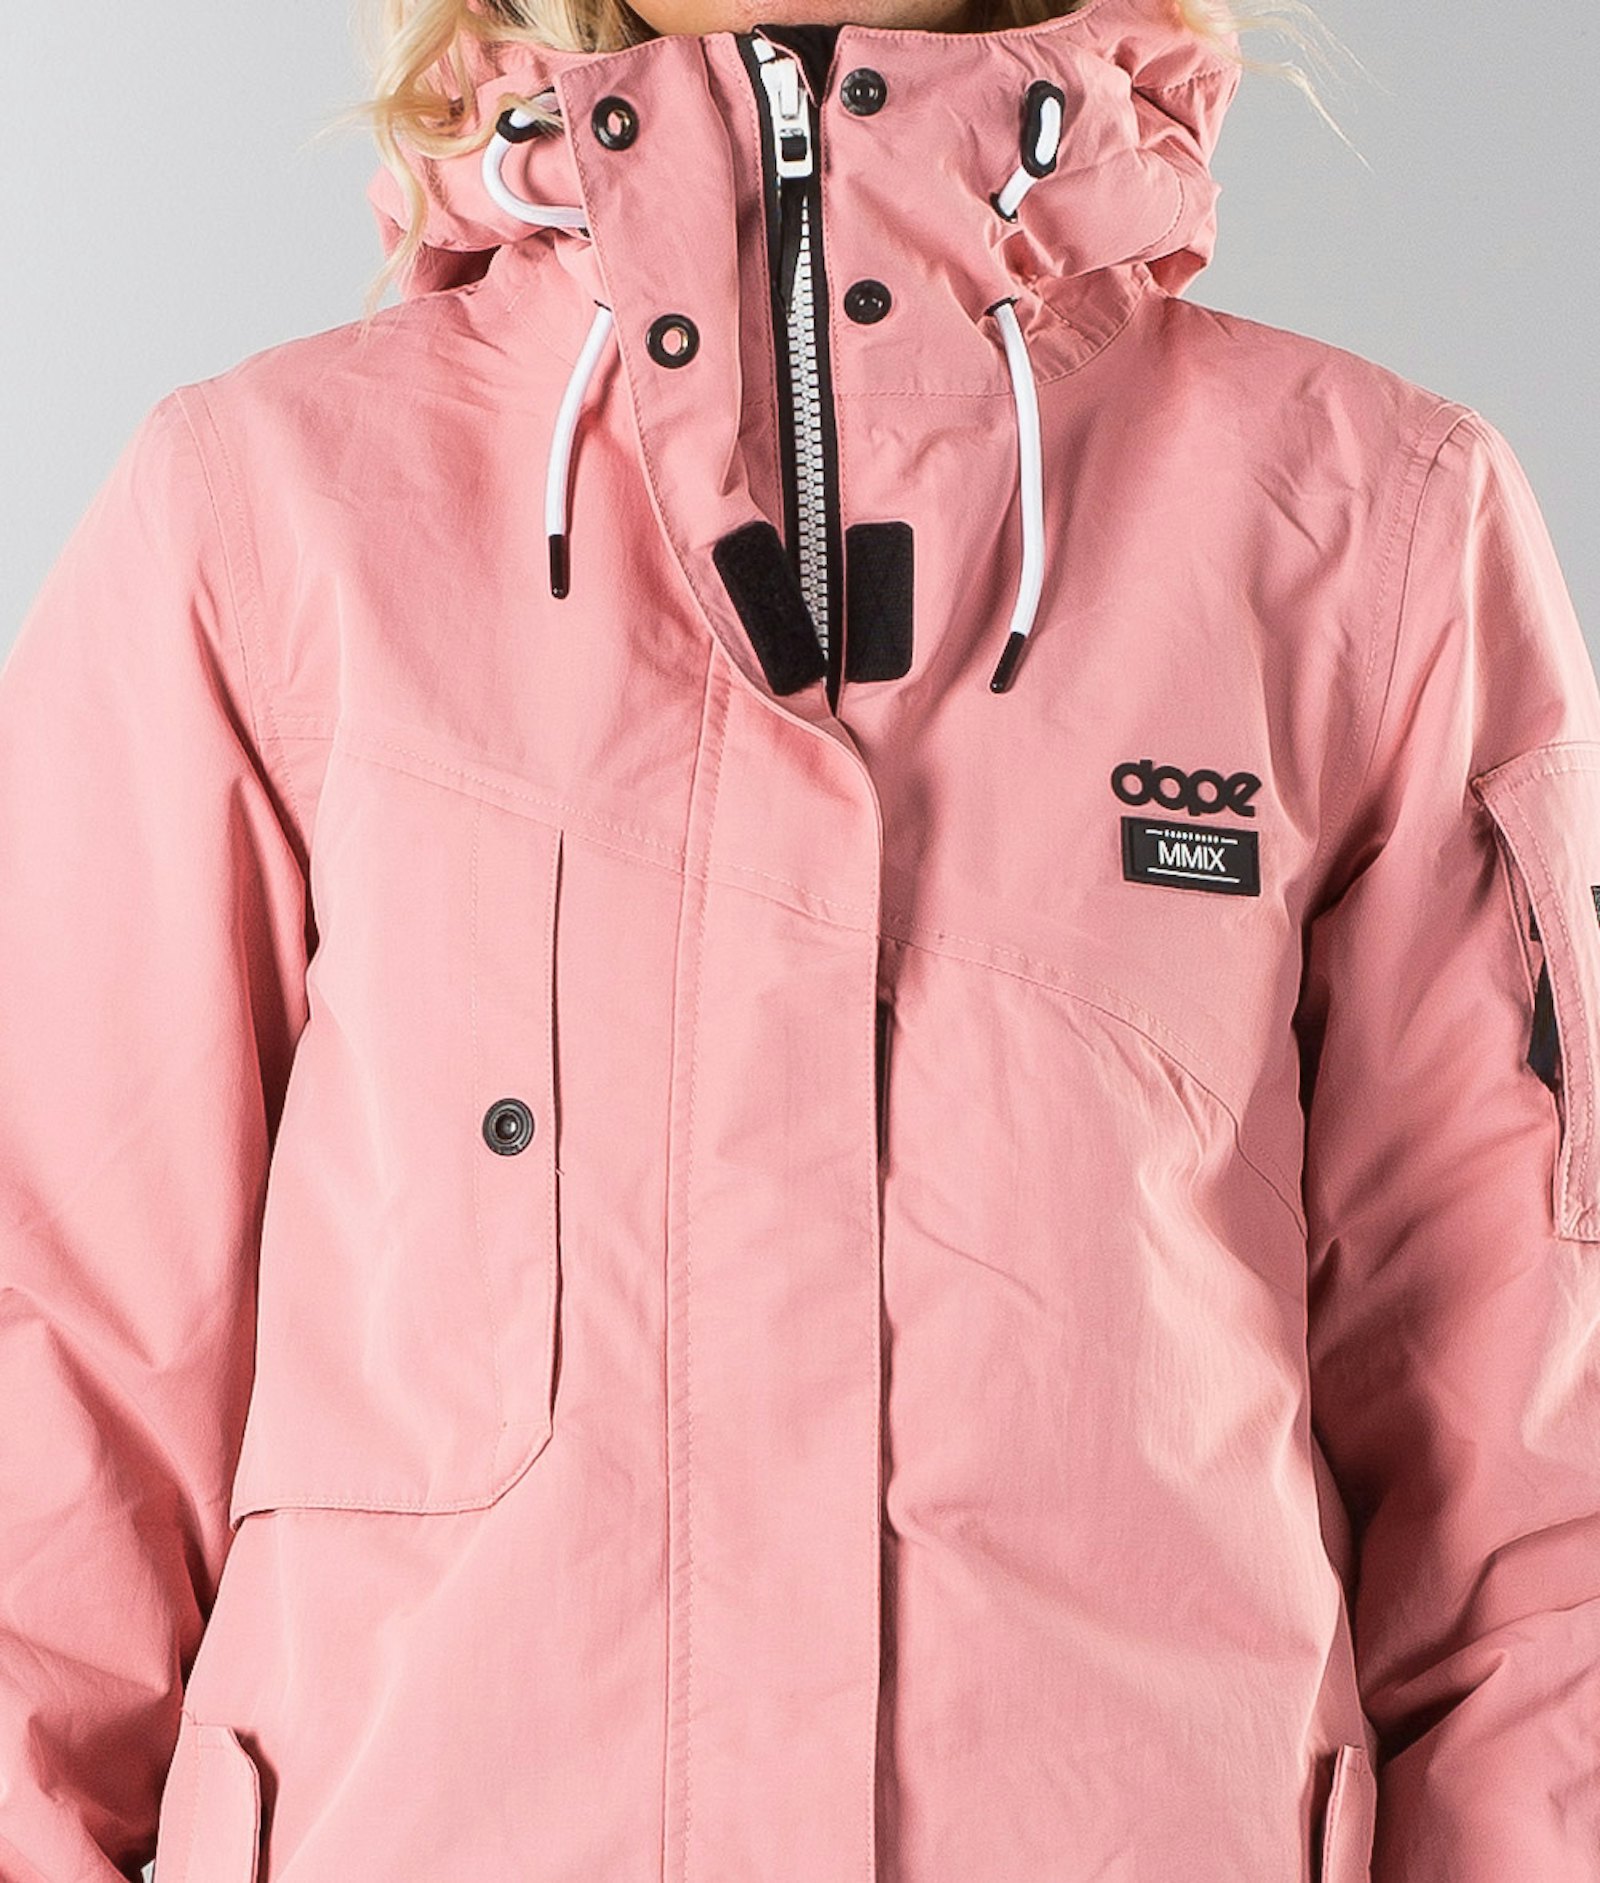 Adept W 2018 Chaqueta Snowboard Mujer Pink